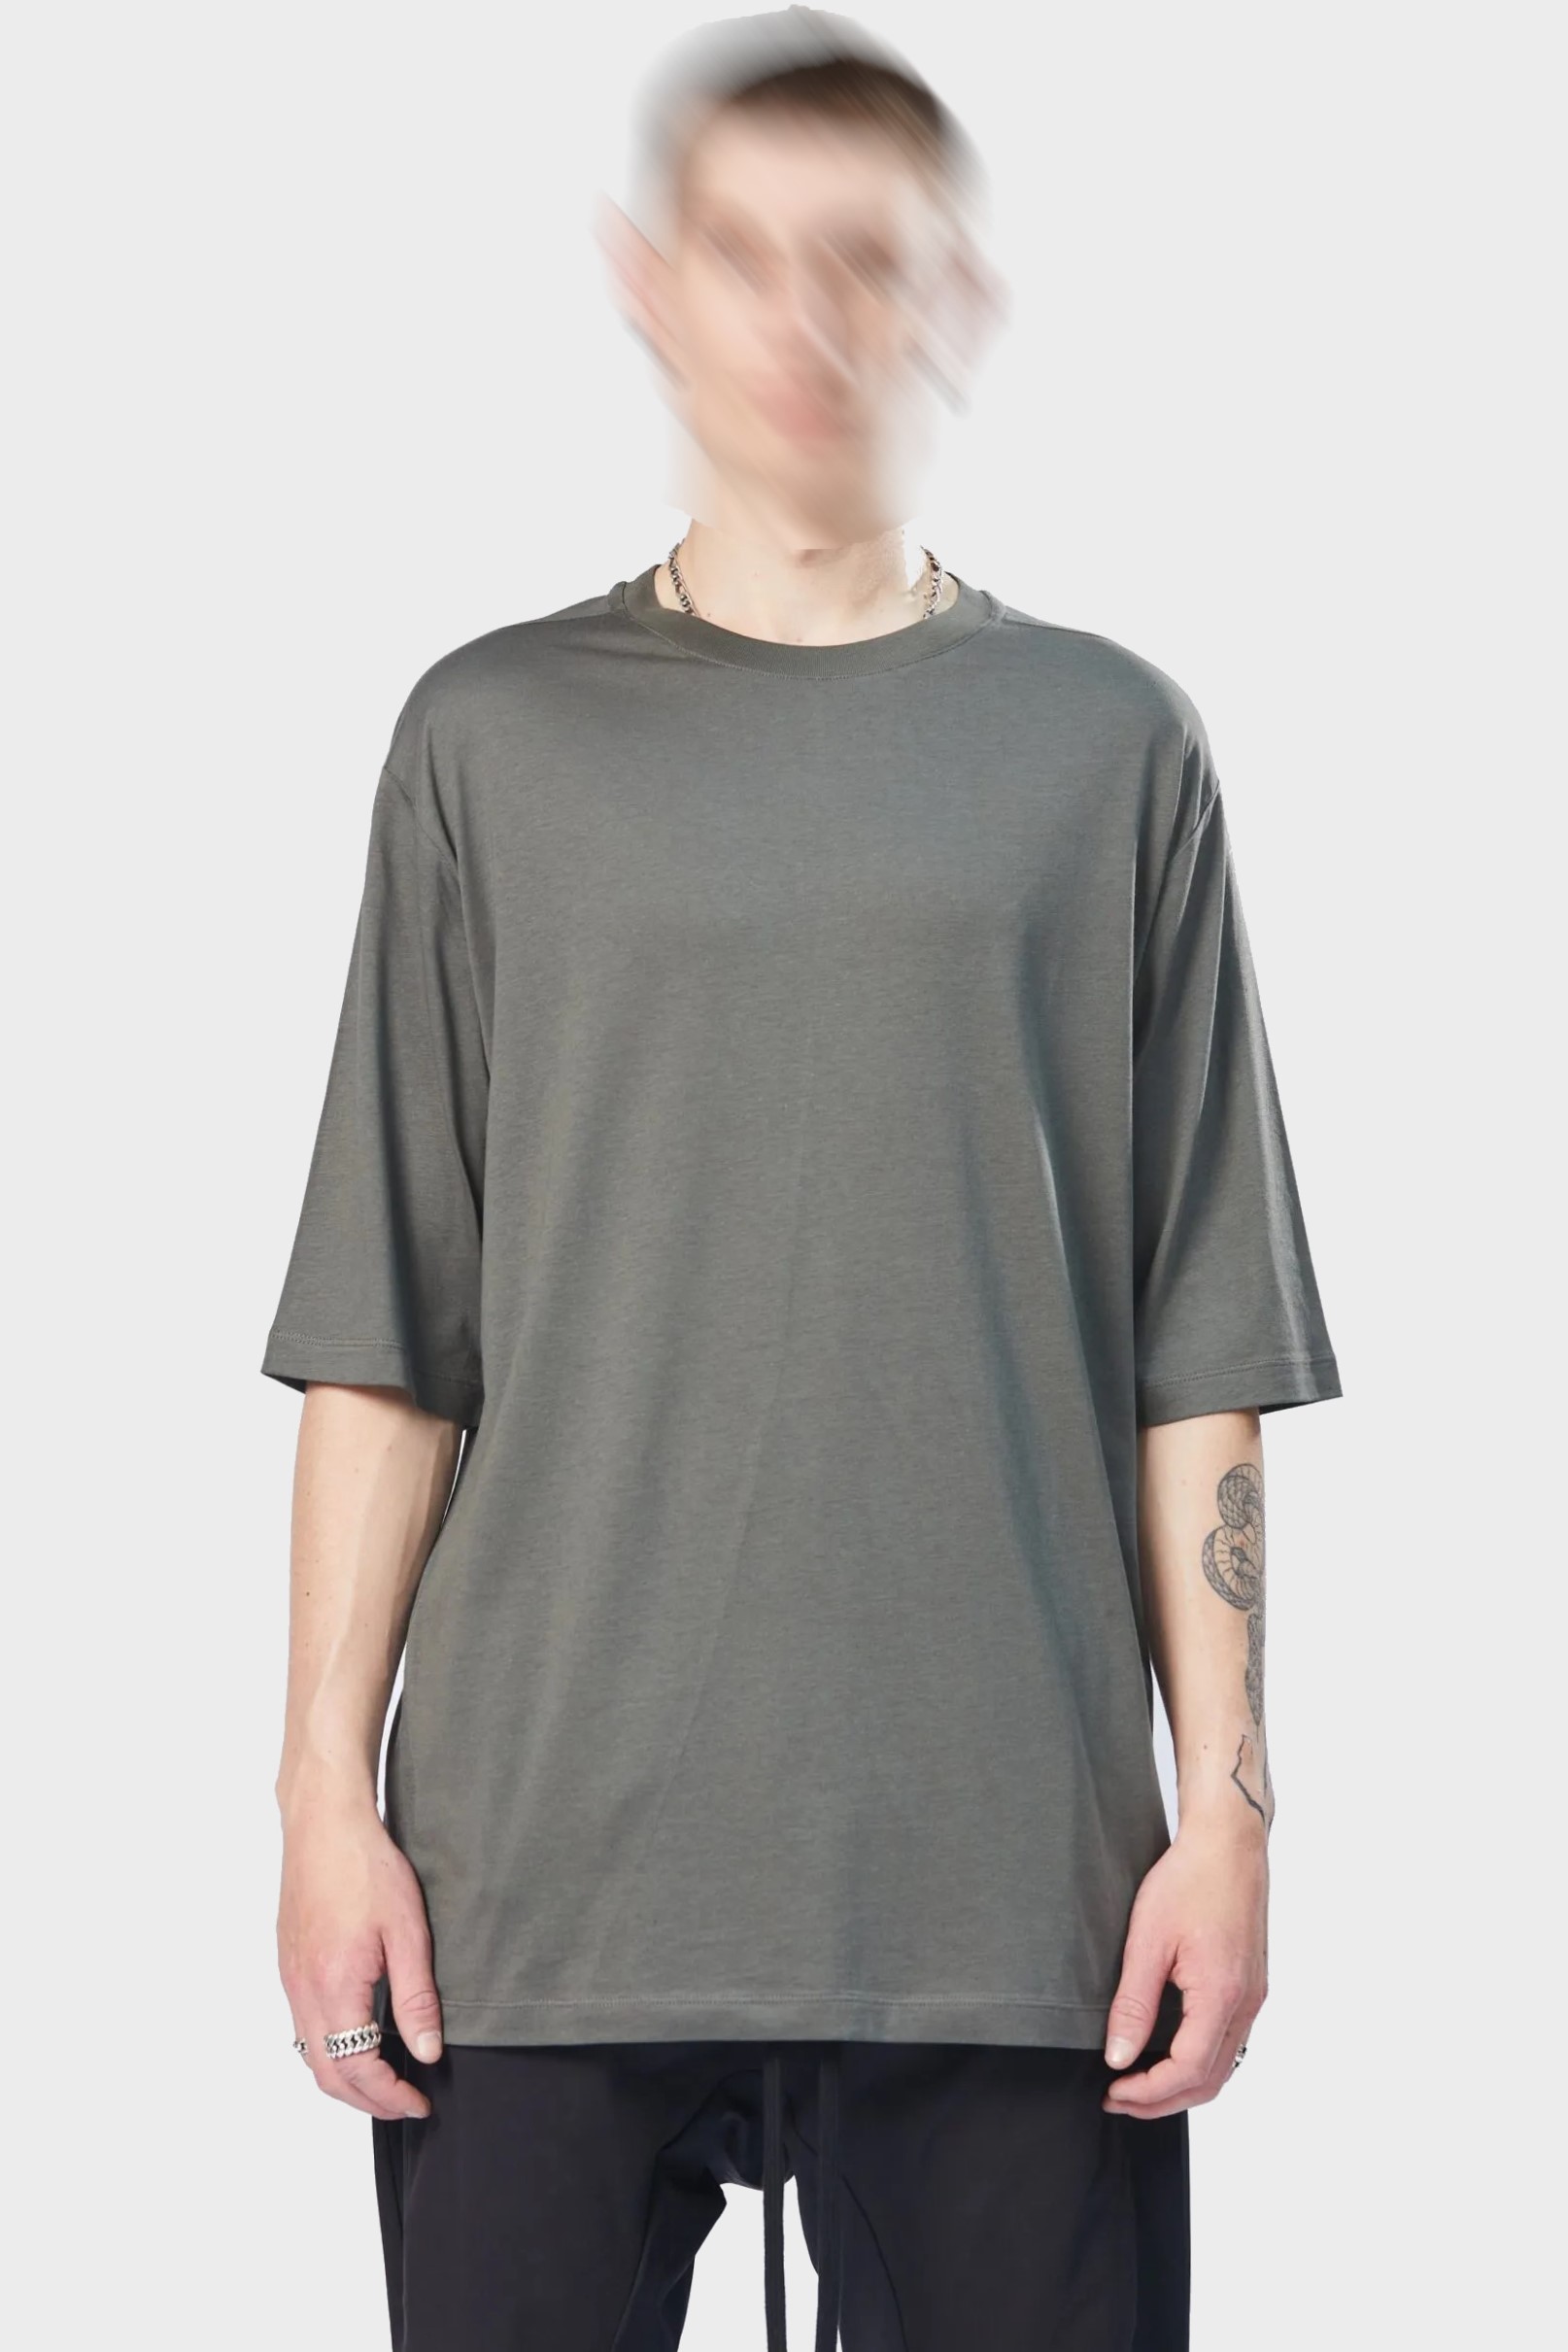 THOM KROM Oversize T-Shirt in Ivy Green S